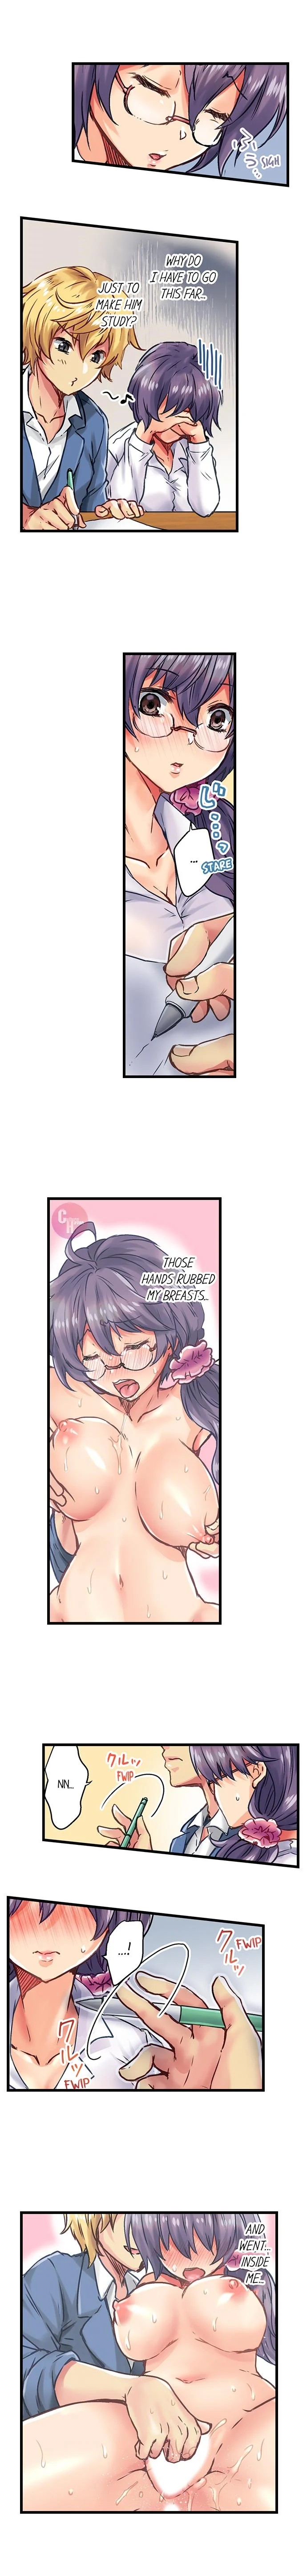 Rewarding My Student With Sex - Chapter 4 Page 6